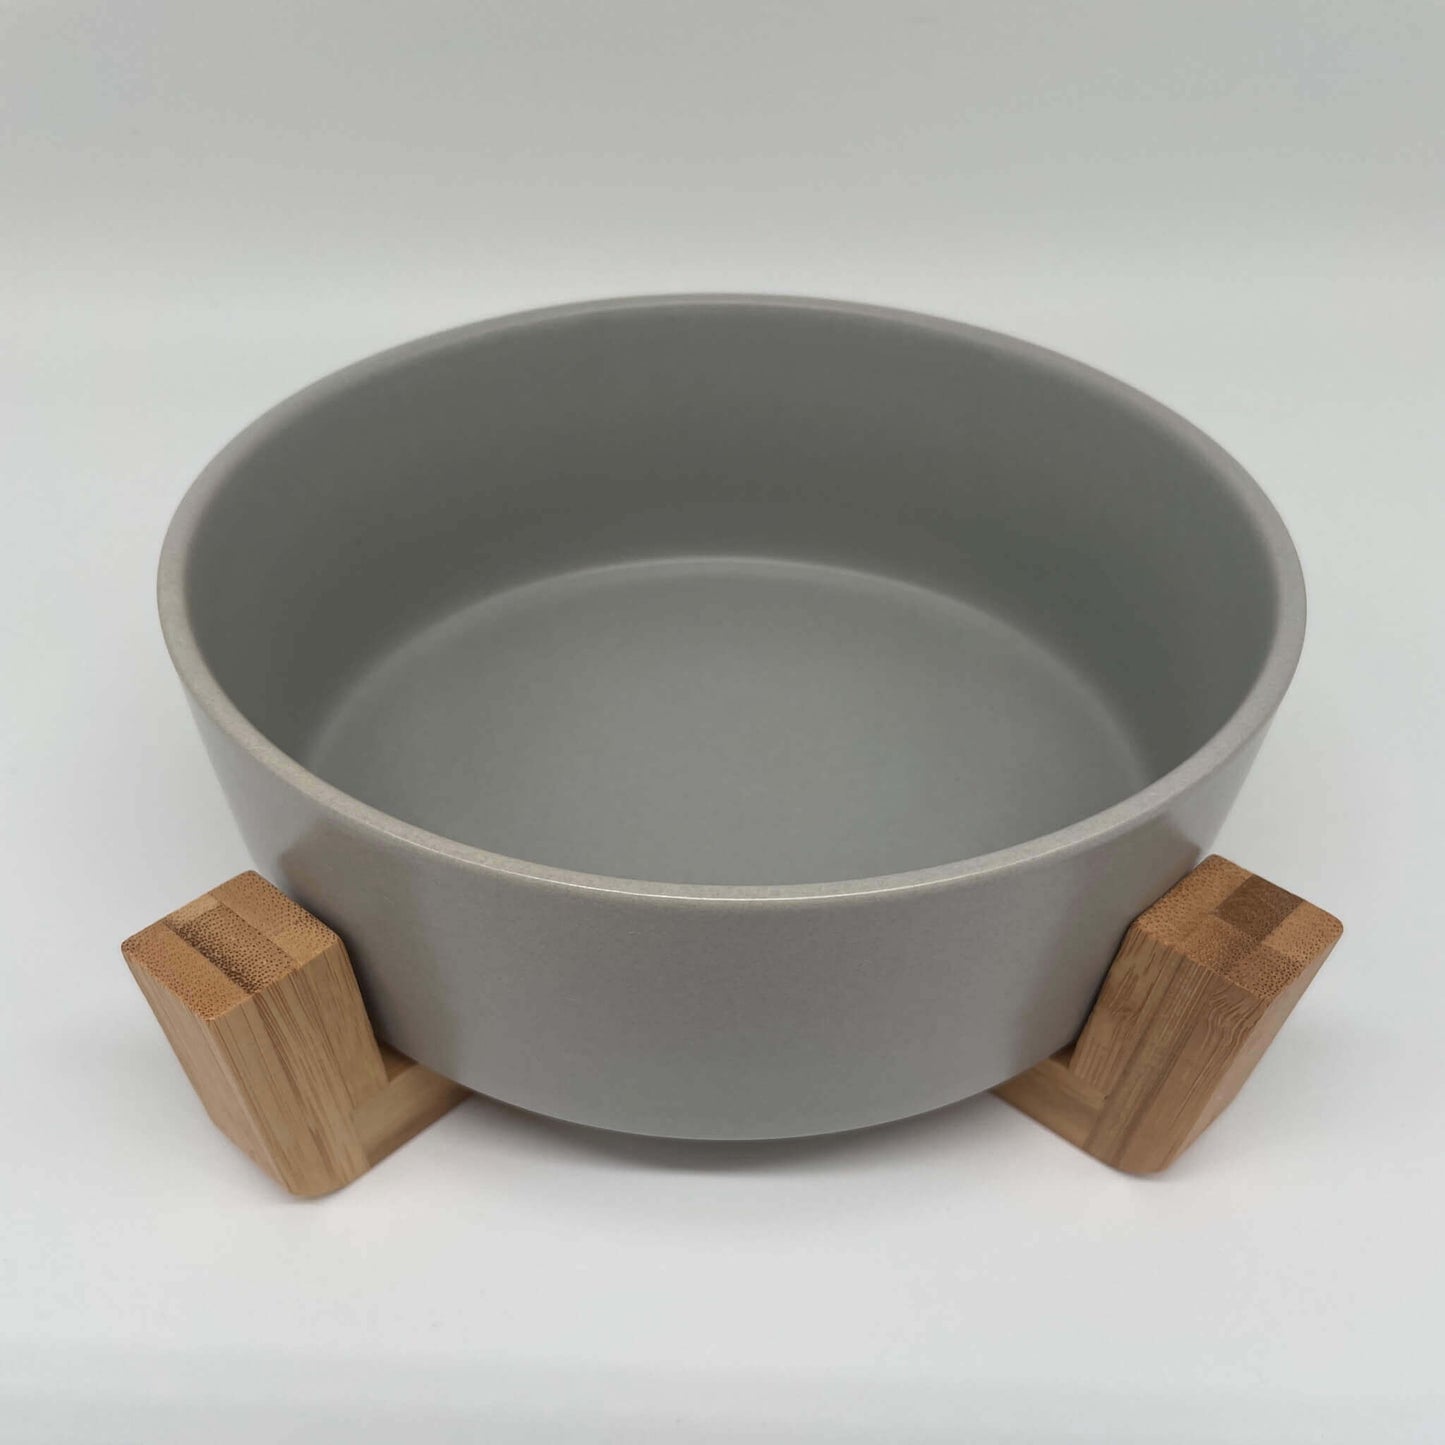 Bamboo love - Ceramic bowl for pets